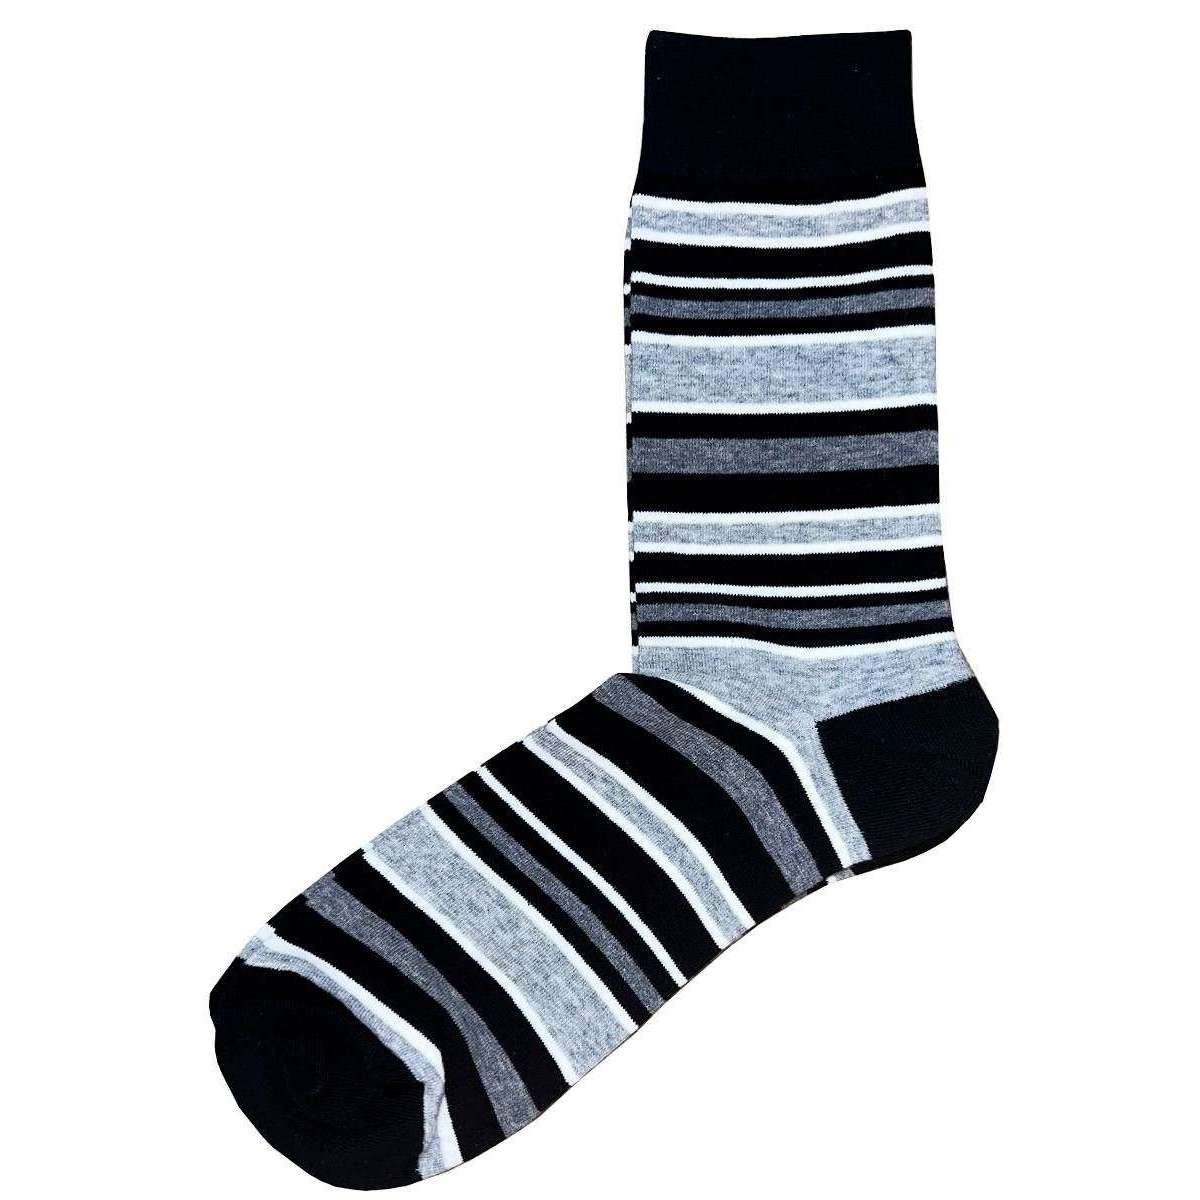 Bassin and Brown Multi Striped Socks - Black/Charcoal/Grey/White